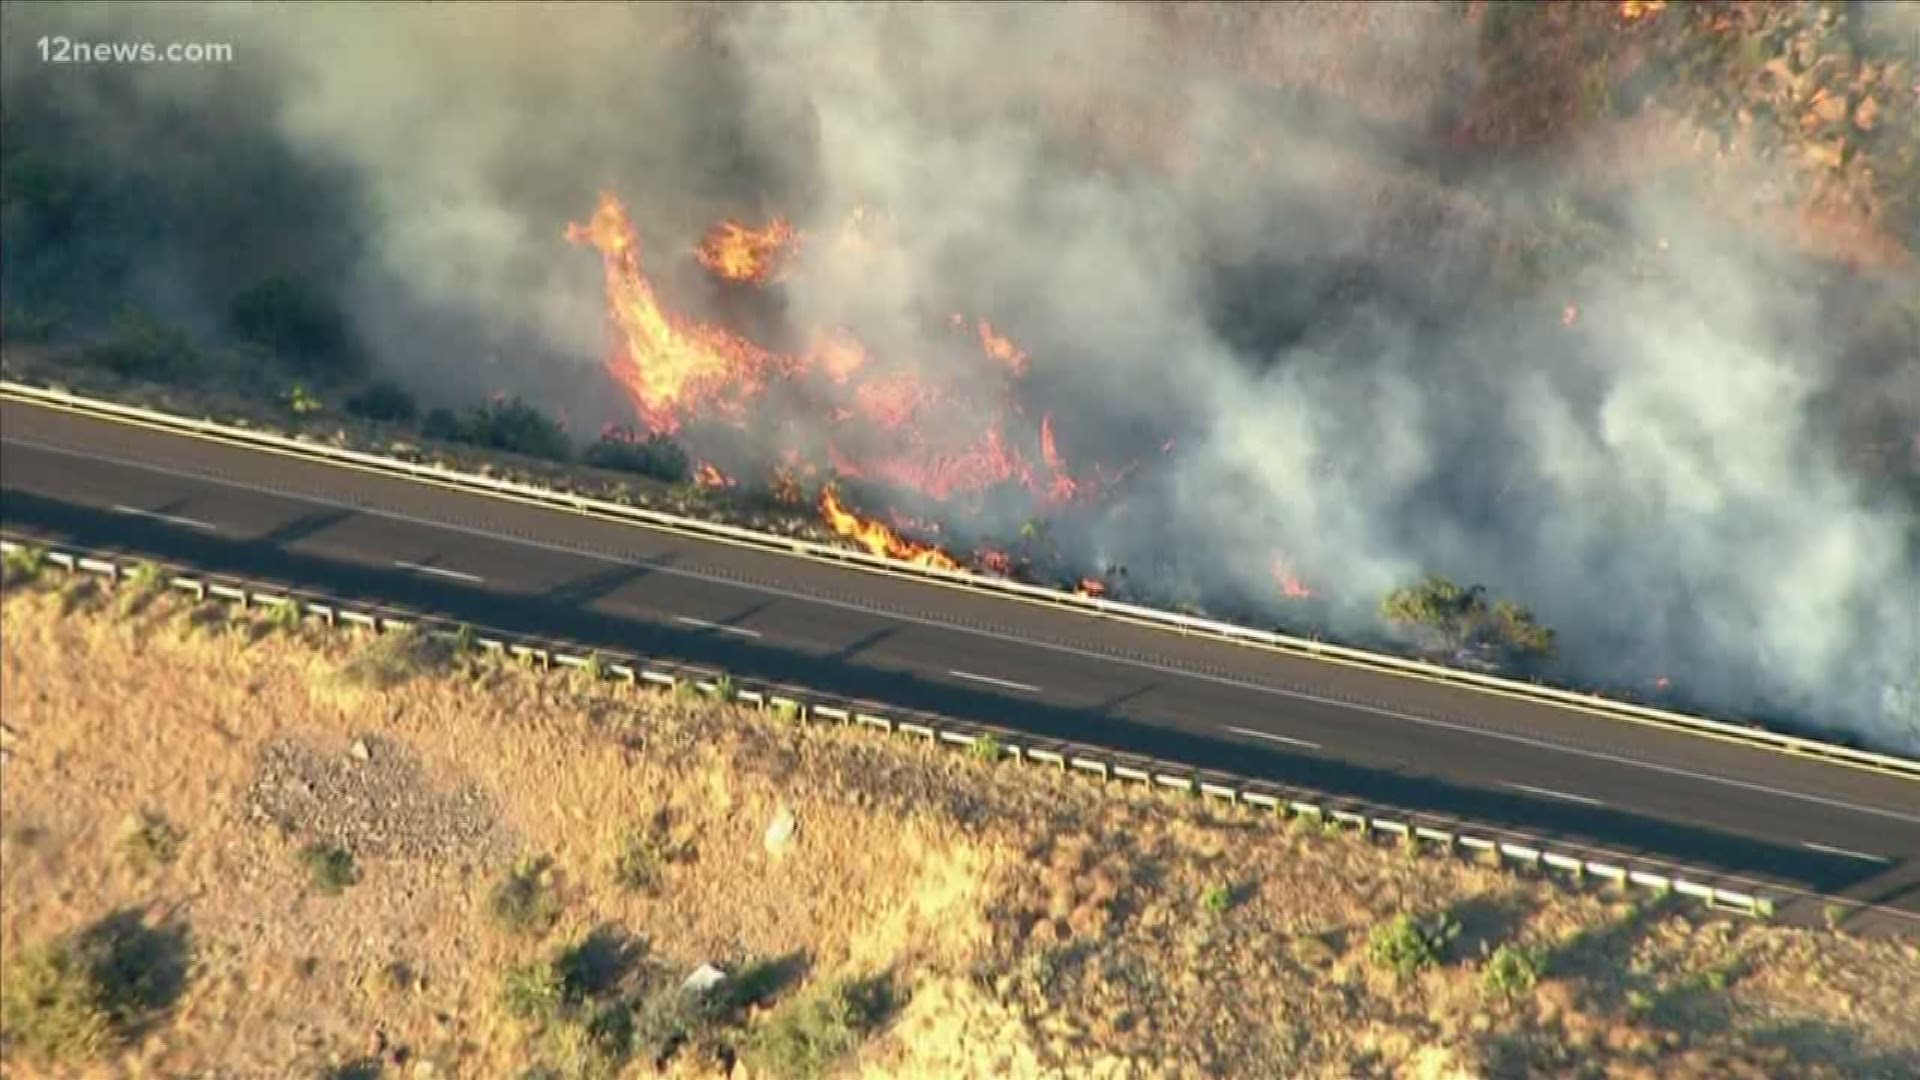 A brush fire burning around 1,000 acres near Interstate 17 has closed the highway in both directions near Sunset Point Friday evening.